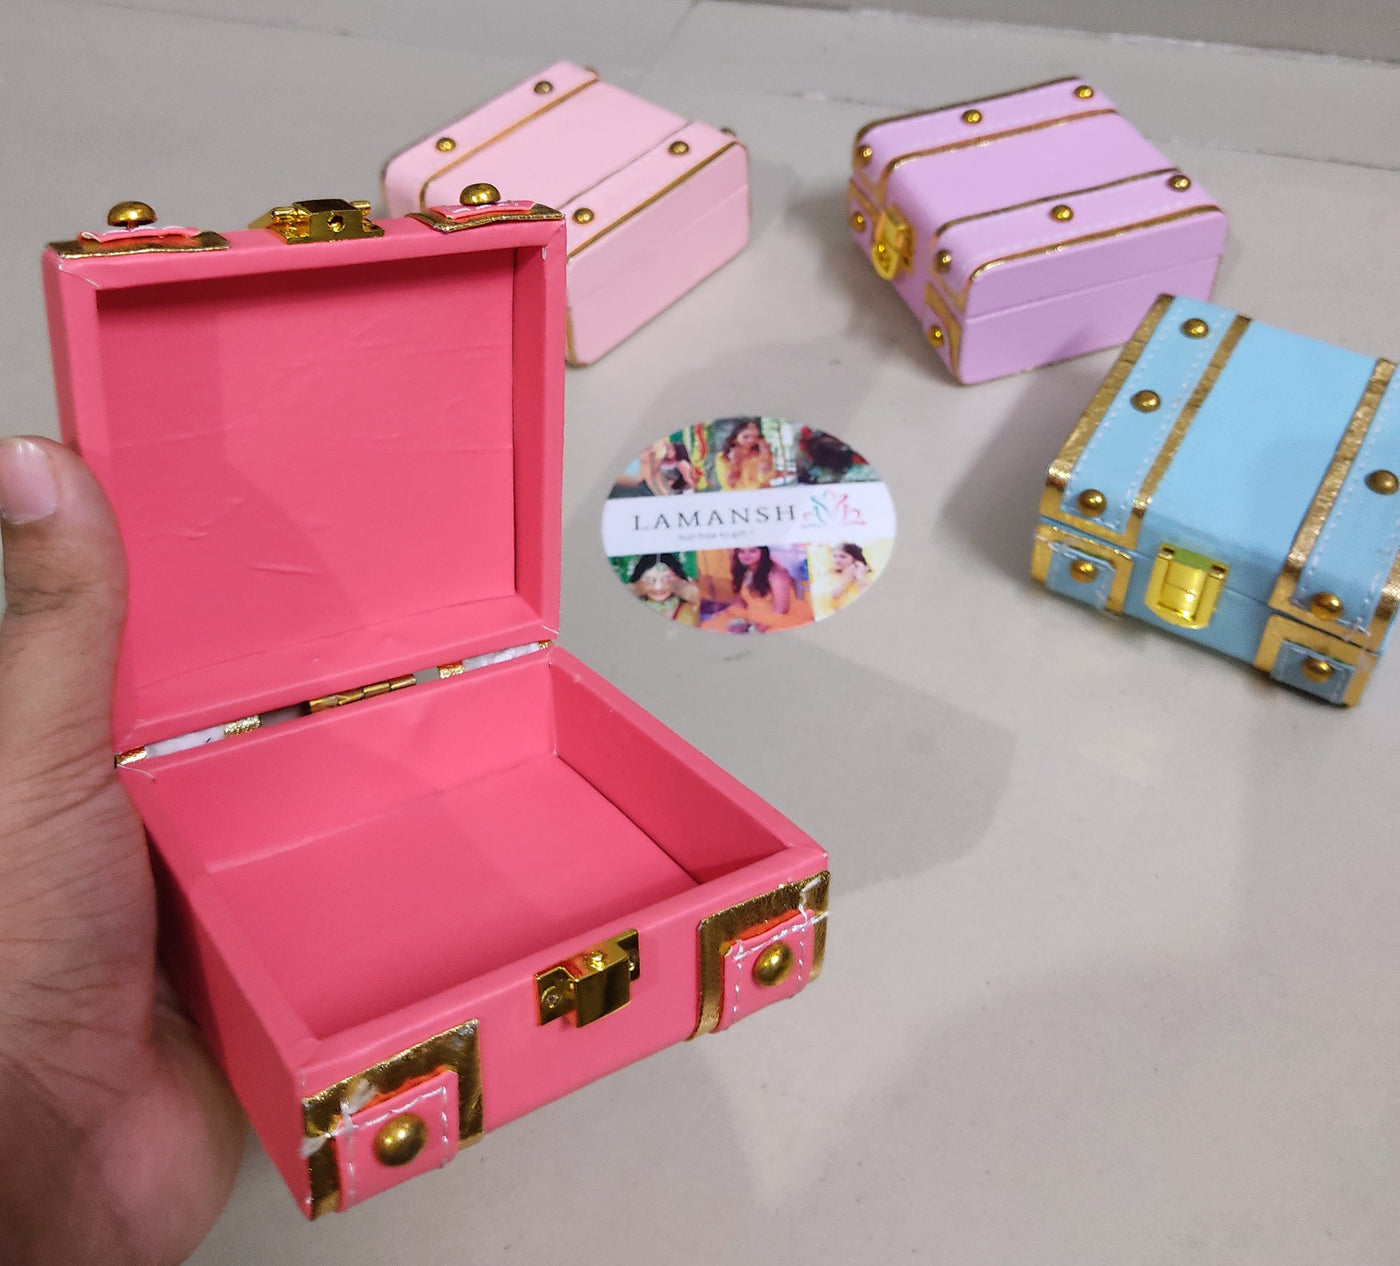 Lamansh leatherite boxes LAMANSH® (4*4*2.15 inch) Leatherette mini trunk boxes for gifting 🎁 / small leatherite lock boxes for wedding favors / mini boxes for giveaways 🎁